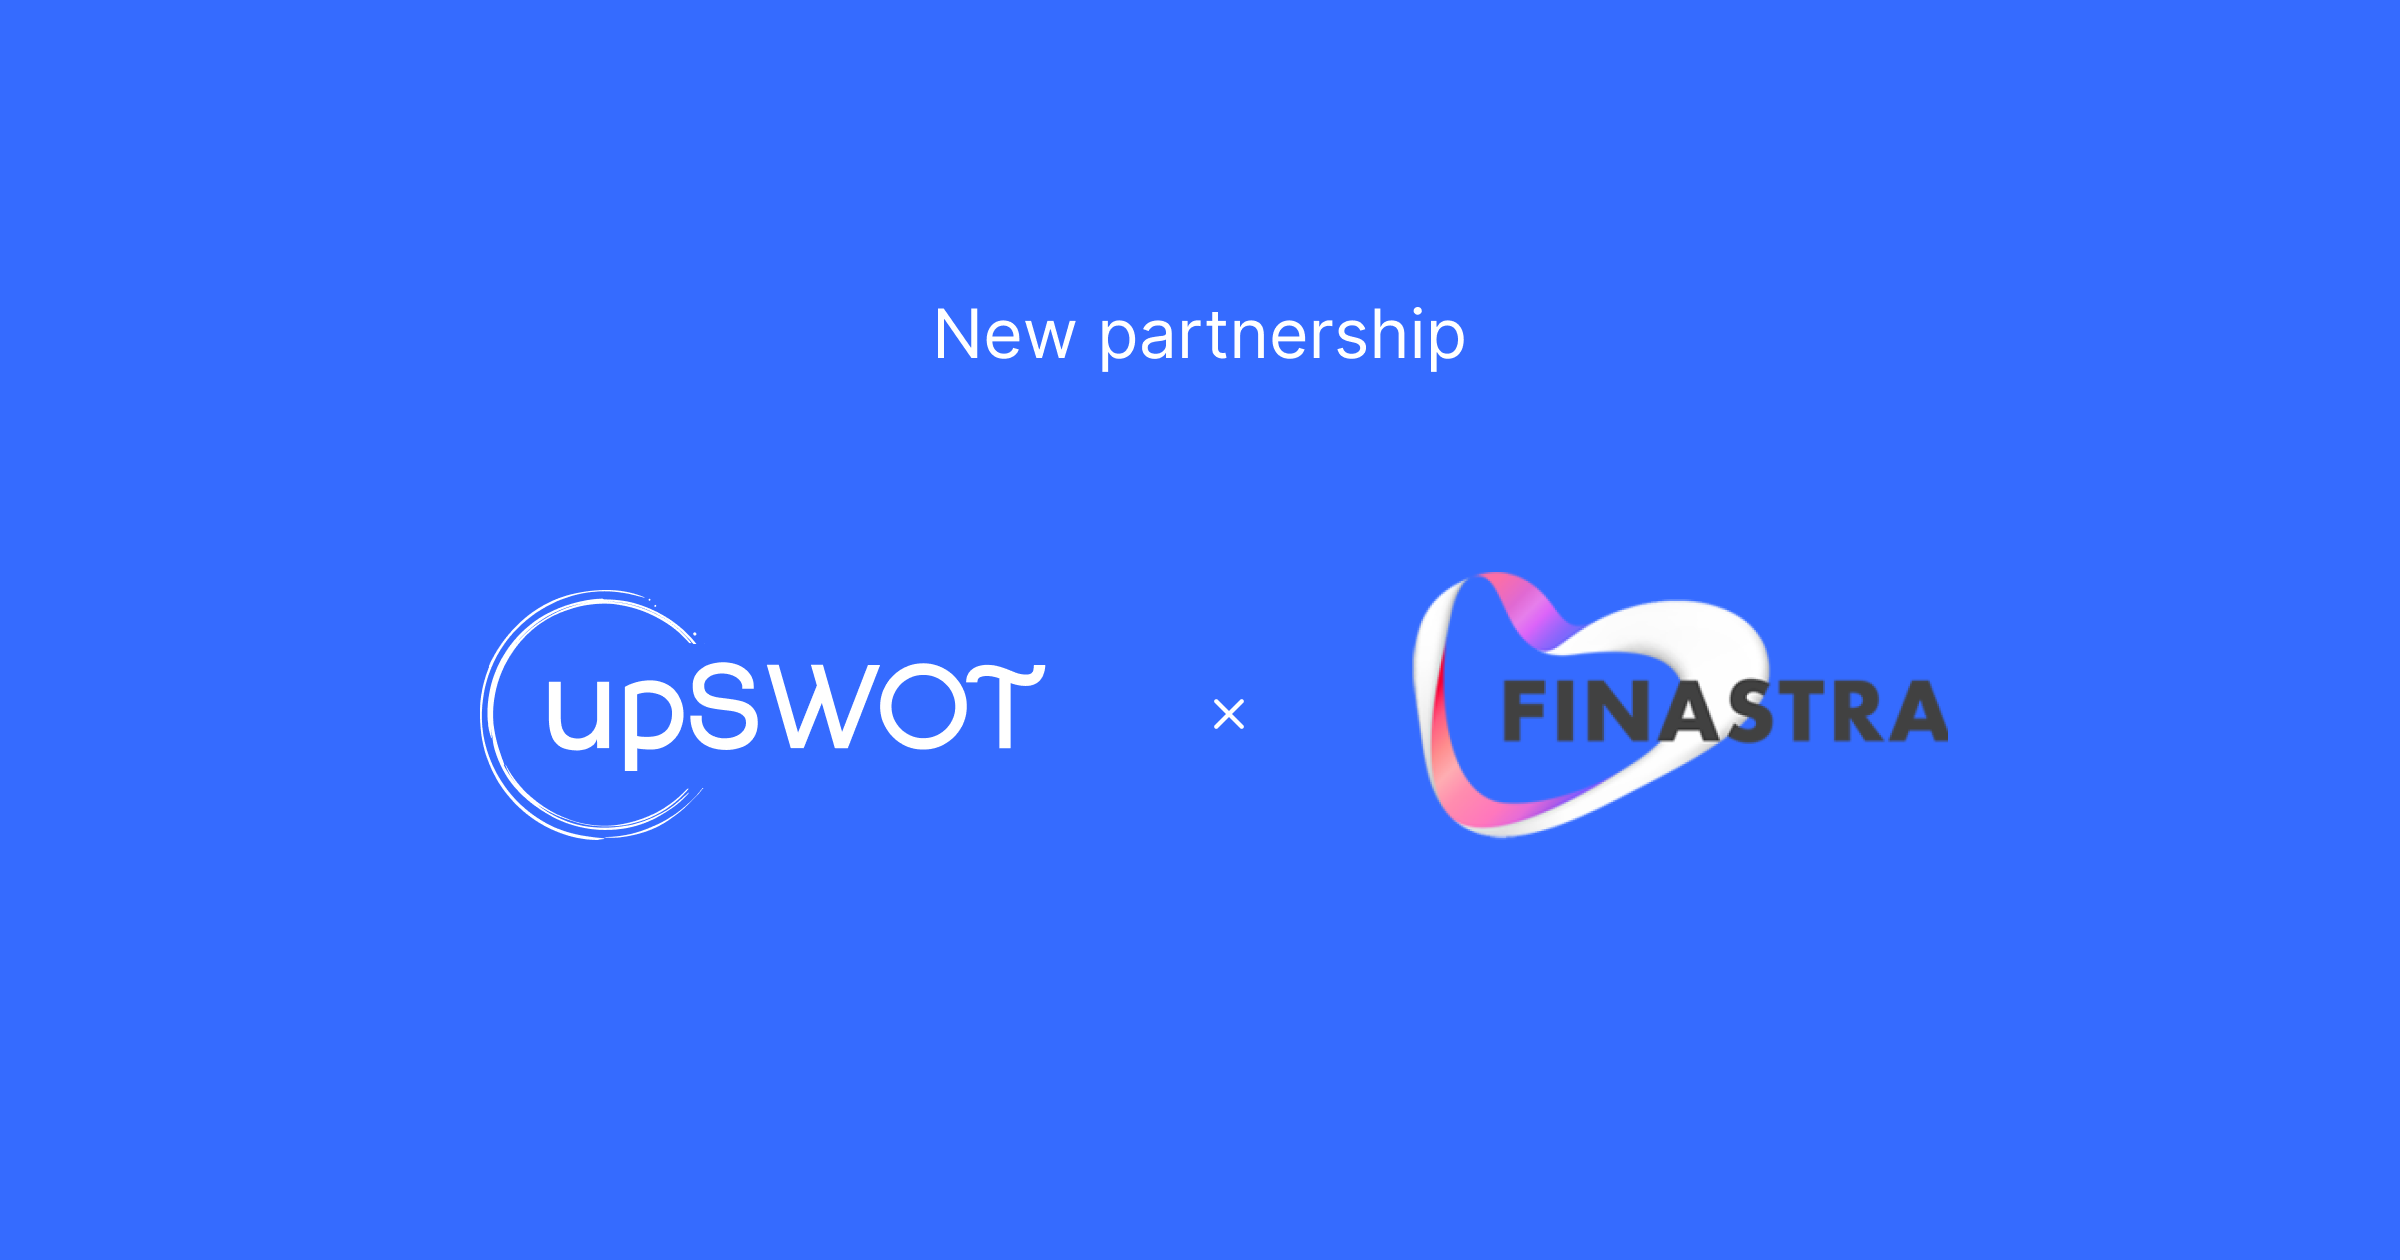 upSWOT And Finastra Are Partnering On bringing The New Generation Of “Embedded Mint For Businesses”